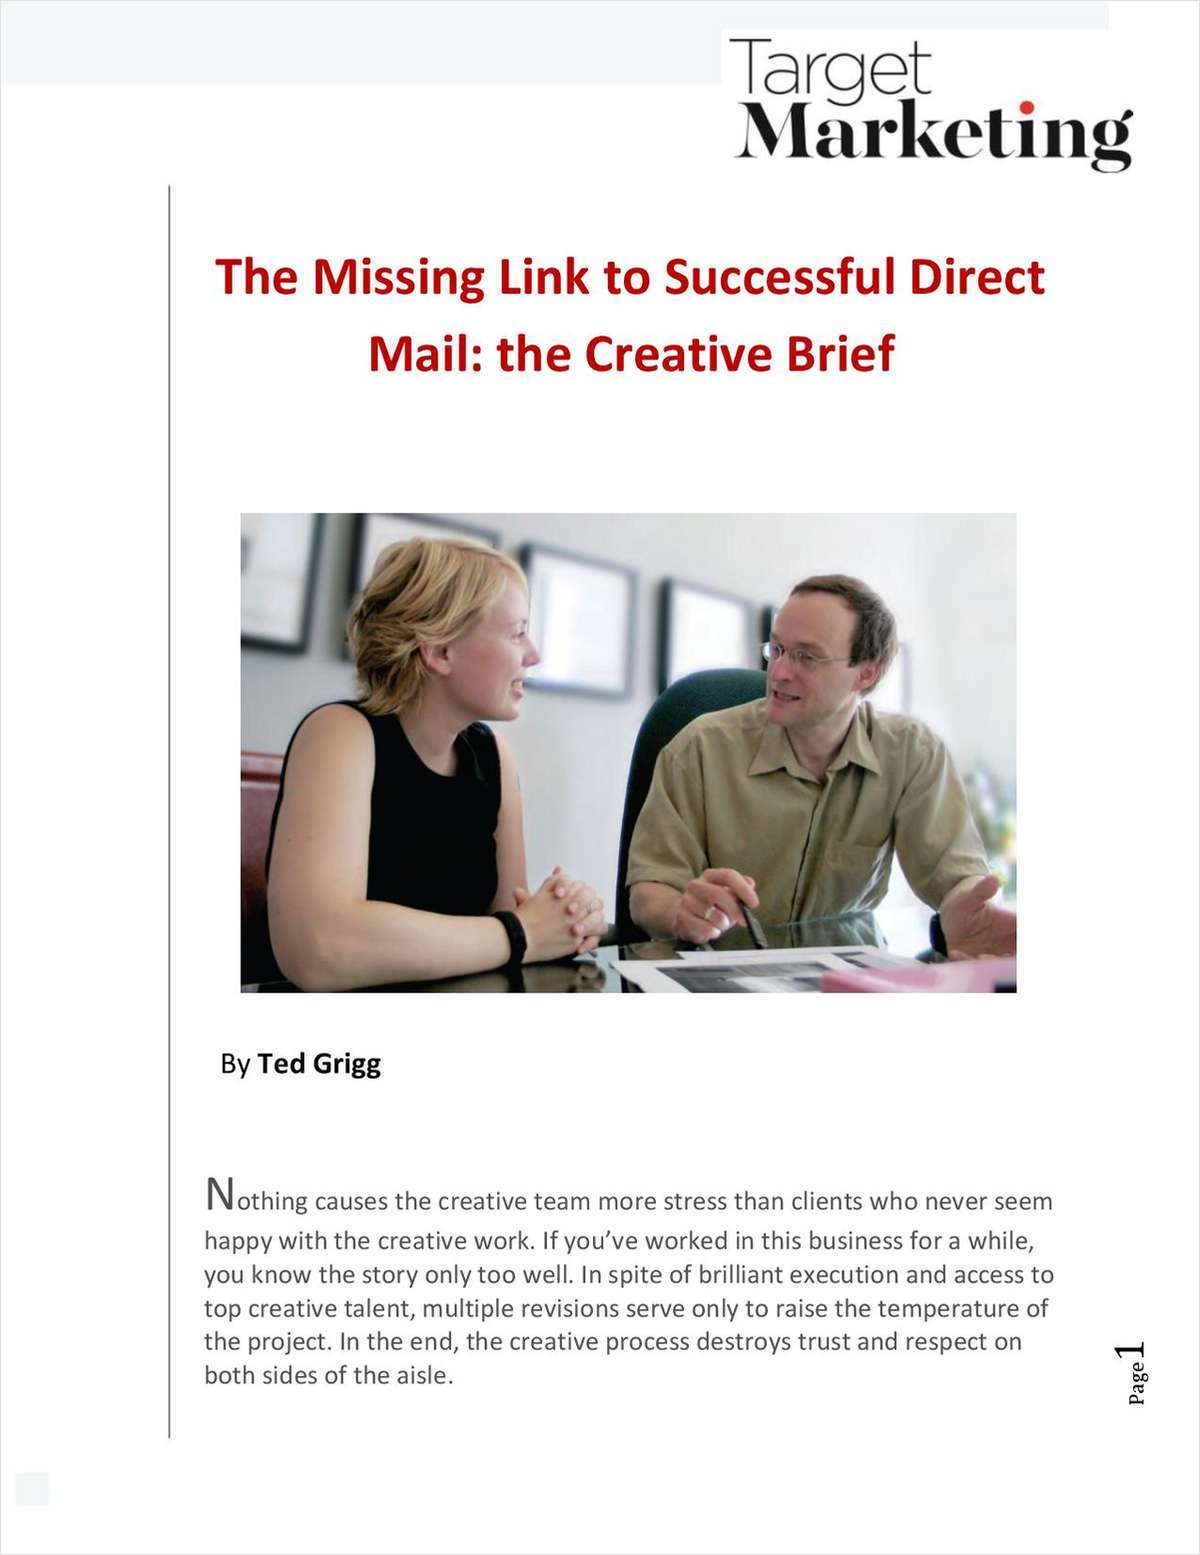 The Missing Link to Successful Direct Mail: The Creative Brief